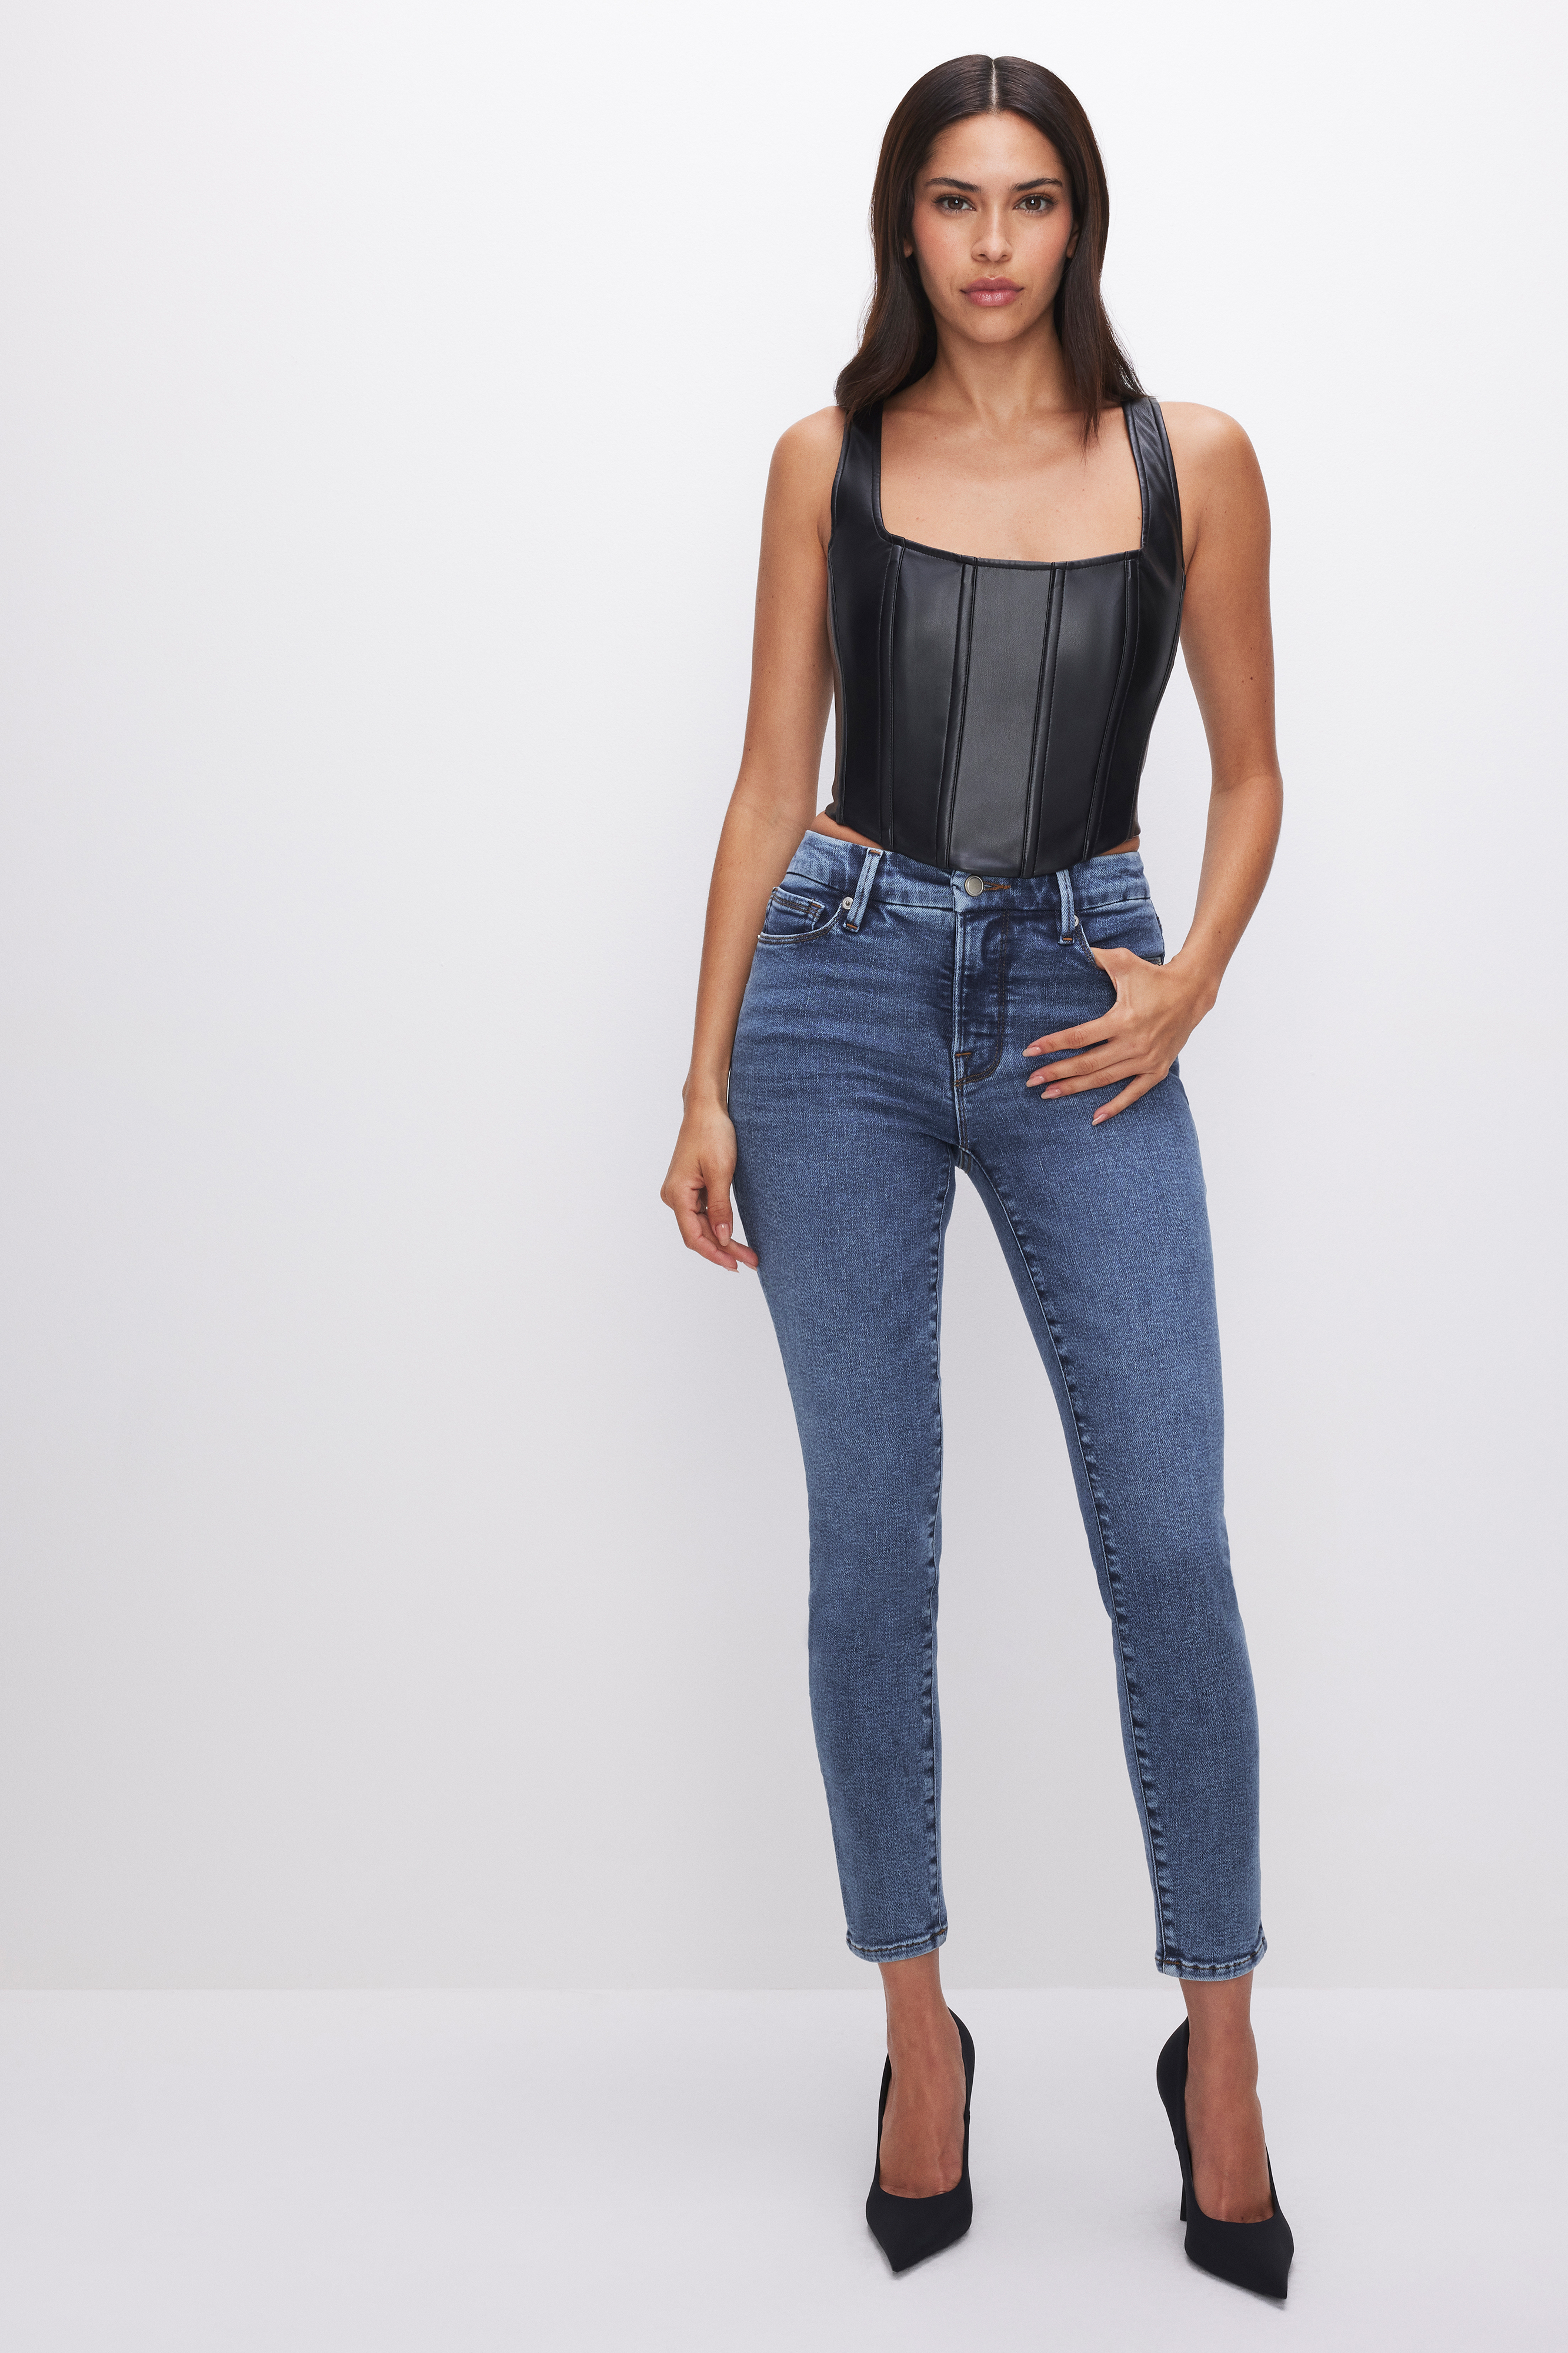 Styled with GOOD LEGS CROPPED SKINNY JEANS | INDIGO508